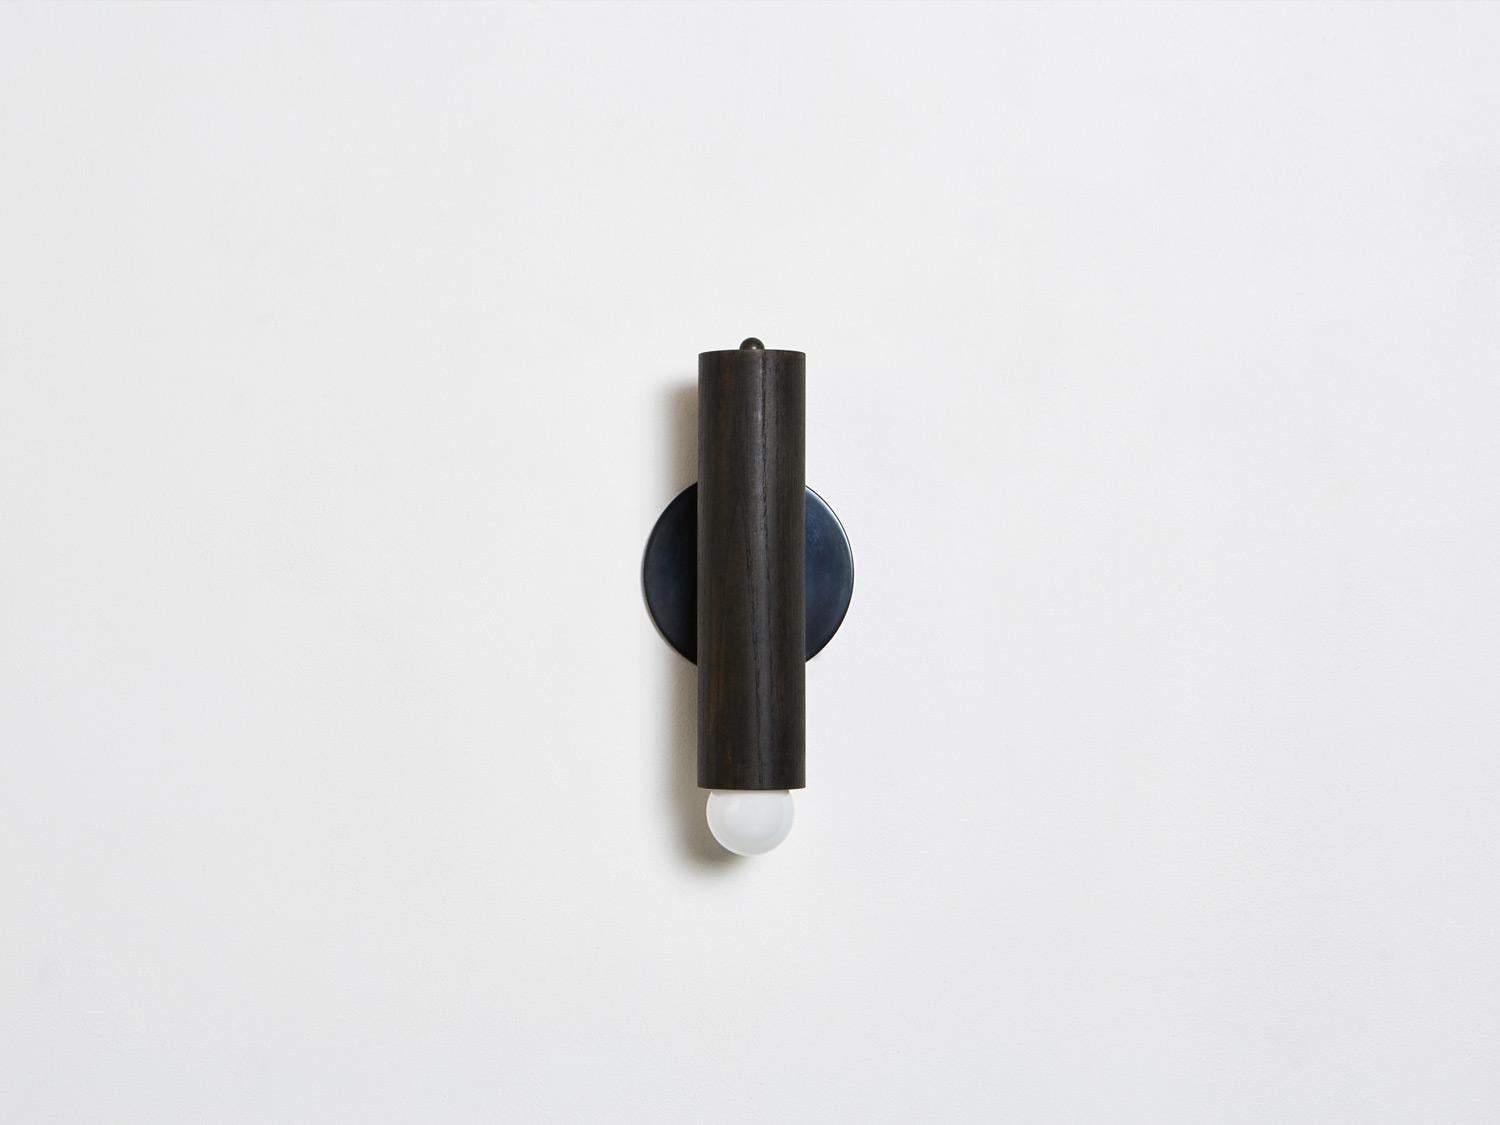 The lodge sconce is composed of a singular wooden column mounted on a metal back plate. The fixture swivels from side to side, directing light from a softly glowing bulb. 

Shown in oxidized oak and blackened steel. 
Dimmer knob located at top of